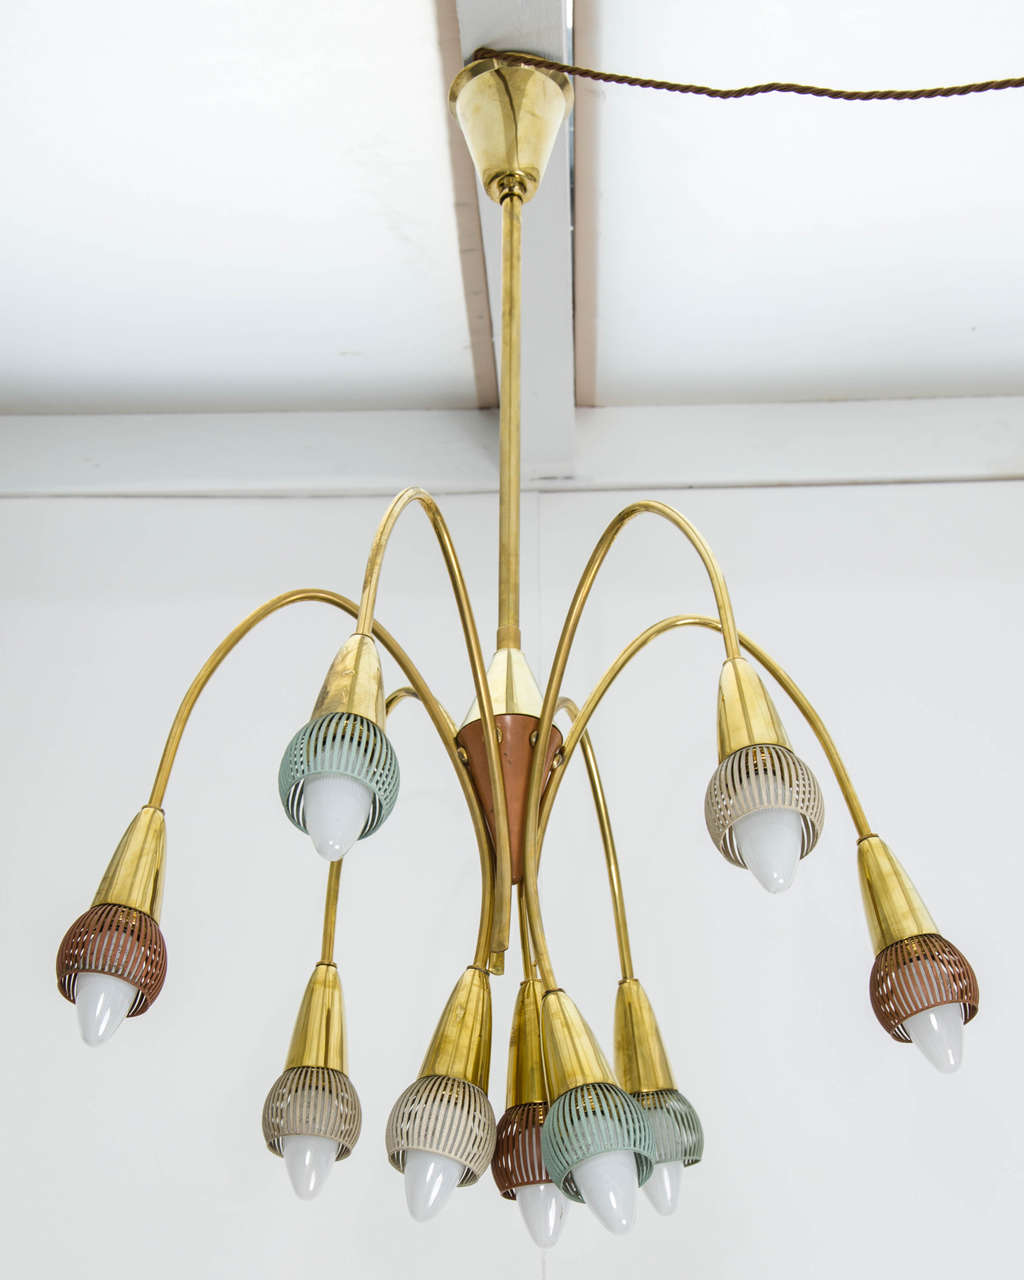 A delicate midcentury chandelier with brass frames and painted cage details, in the style of Stilnovo, Italy. Two available, price per piece.

Each piece has nine lights; the chandeliers are fully rewired and certified for the UK (PAT